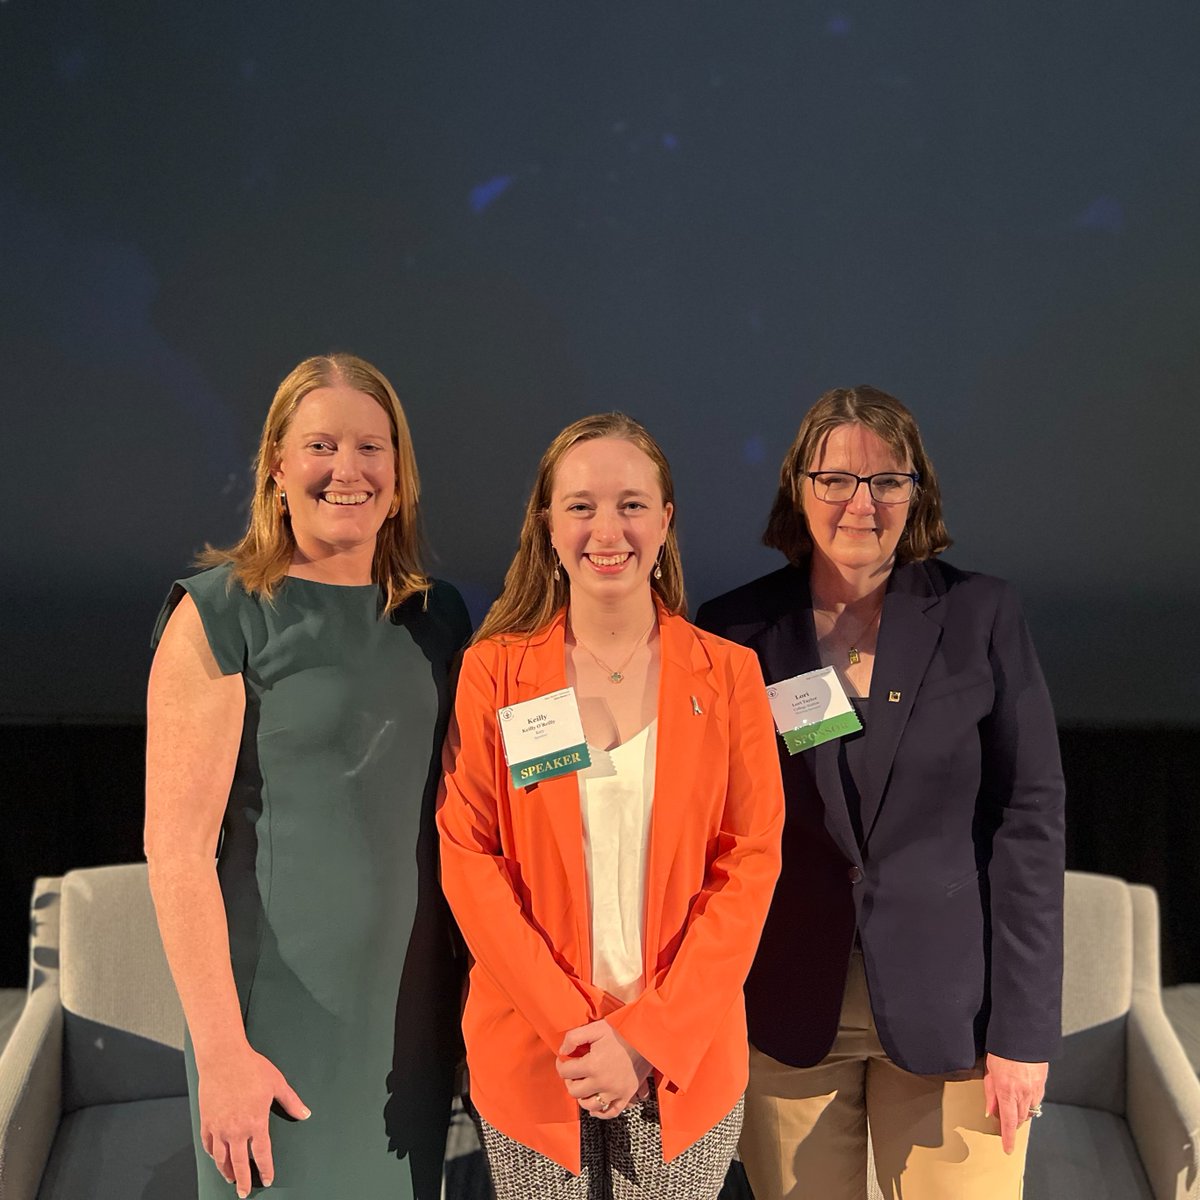 Congrats to Bush School's Keilly O'Reilly for presenting her space industry workforce research at the Texas Lyceum's PubCon at Space Center Houston! Read Keilly's work here: bit.ly/3TP1n5I! #BushSchool #TexasLyceum #SpaceCenterHouston